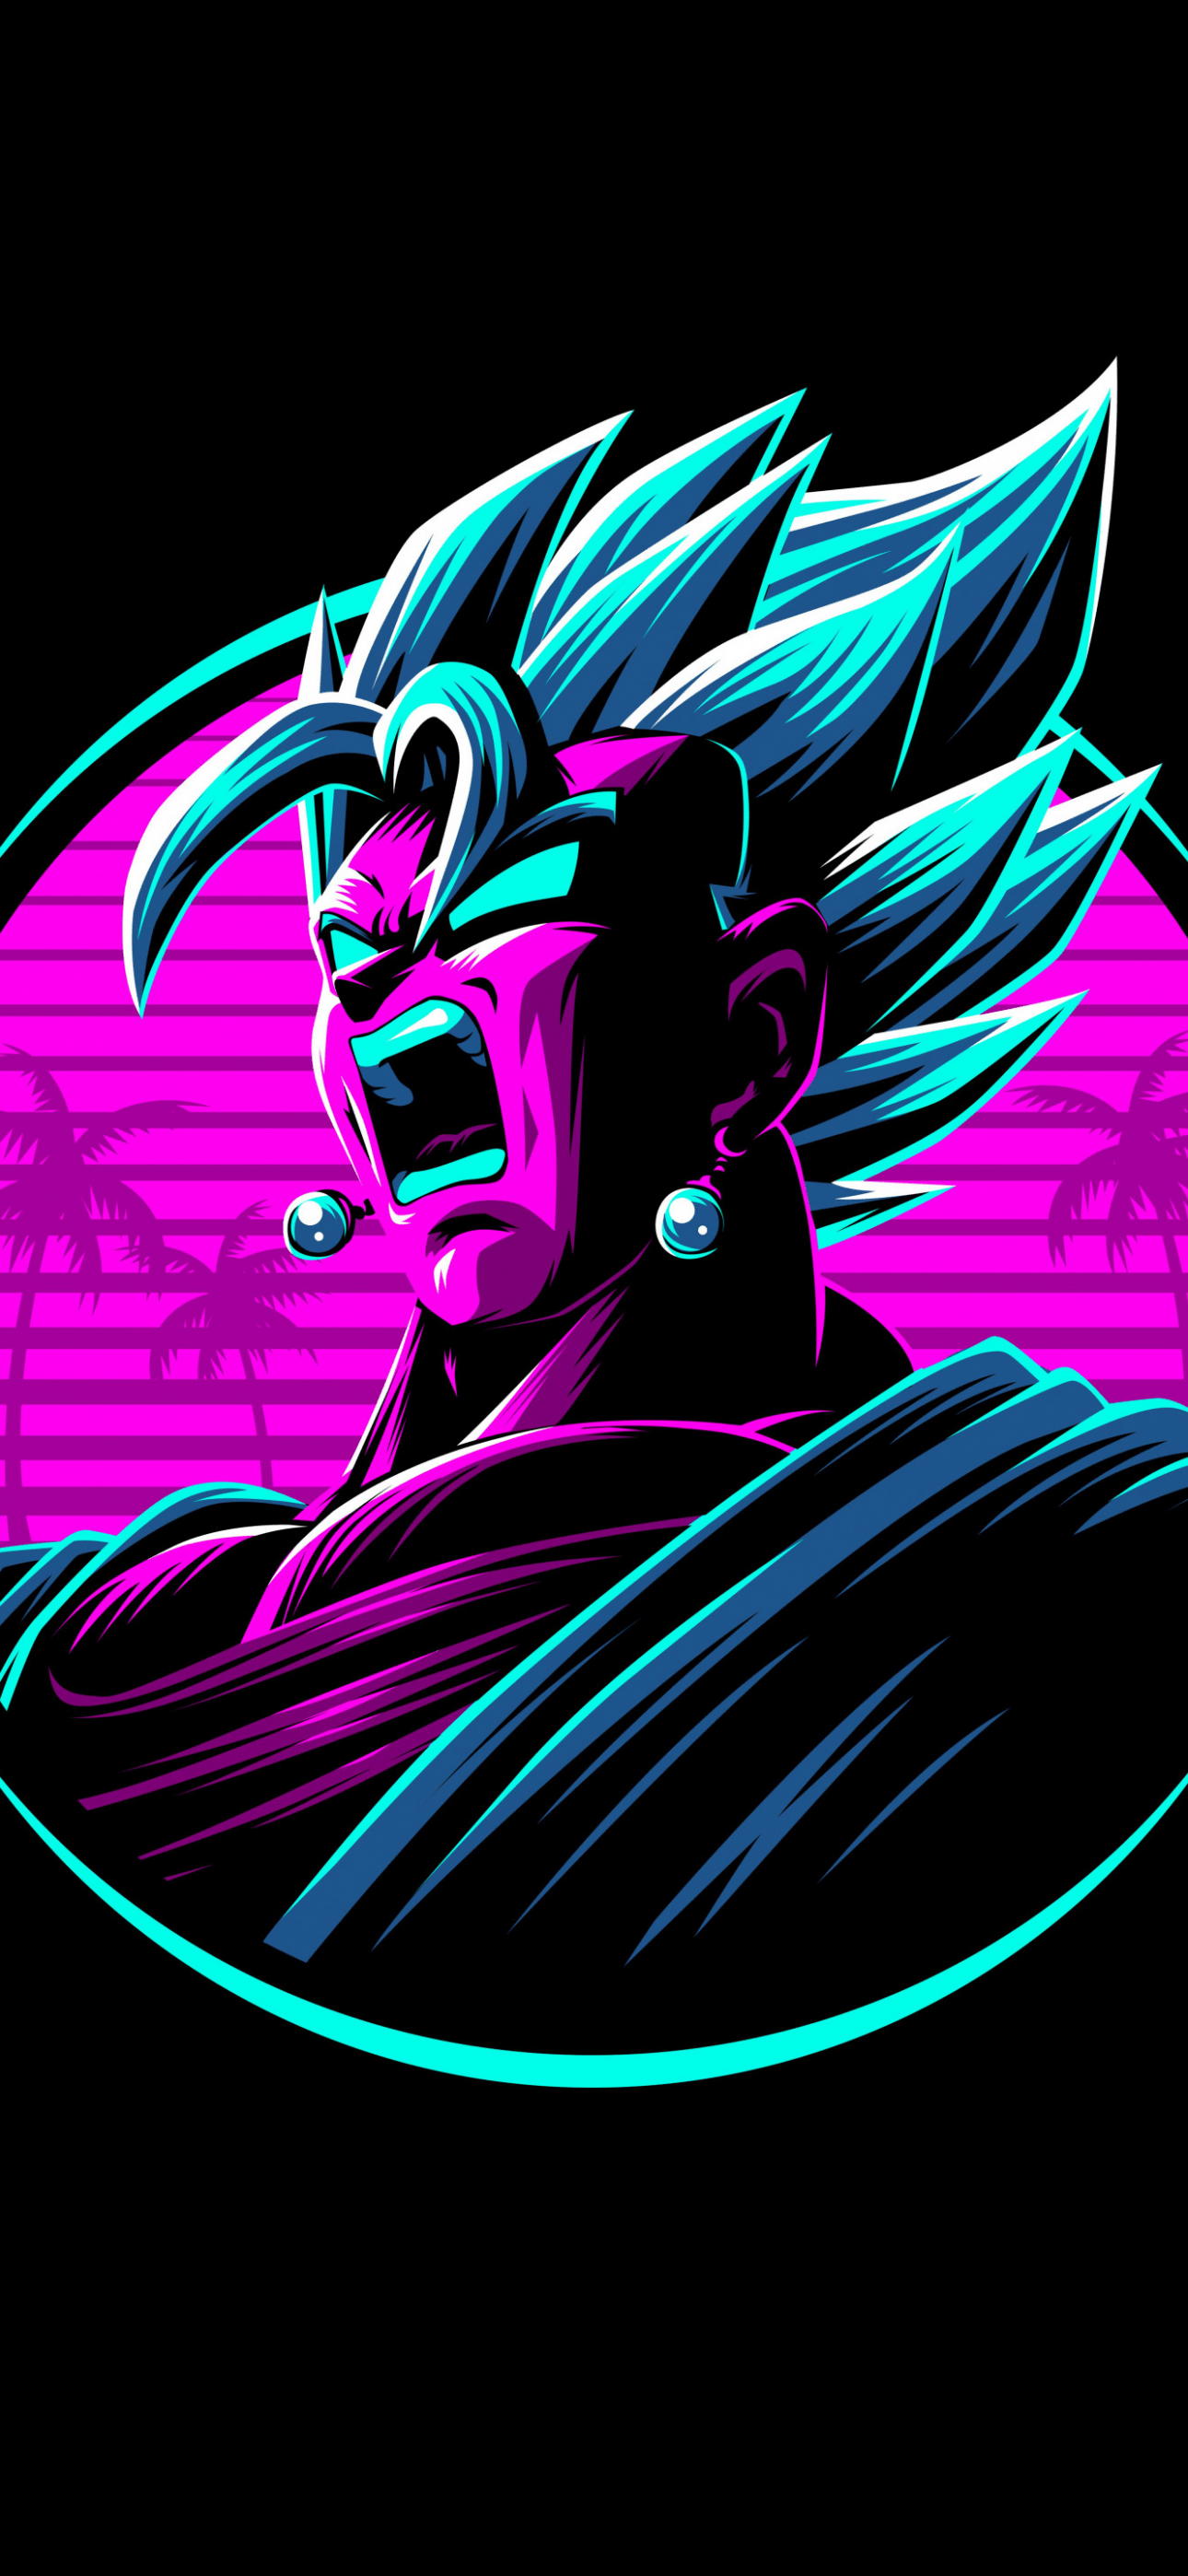 1080x2340 wallpaper of goku in the style of 80s aesthetics - Dragon Ball